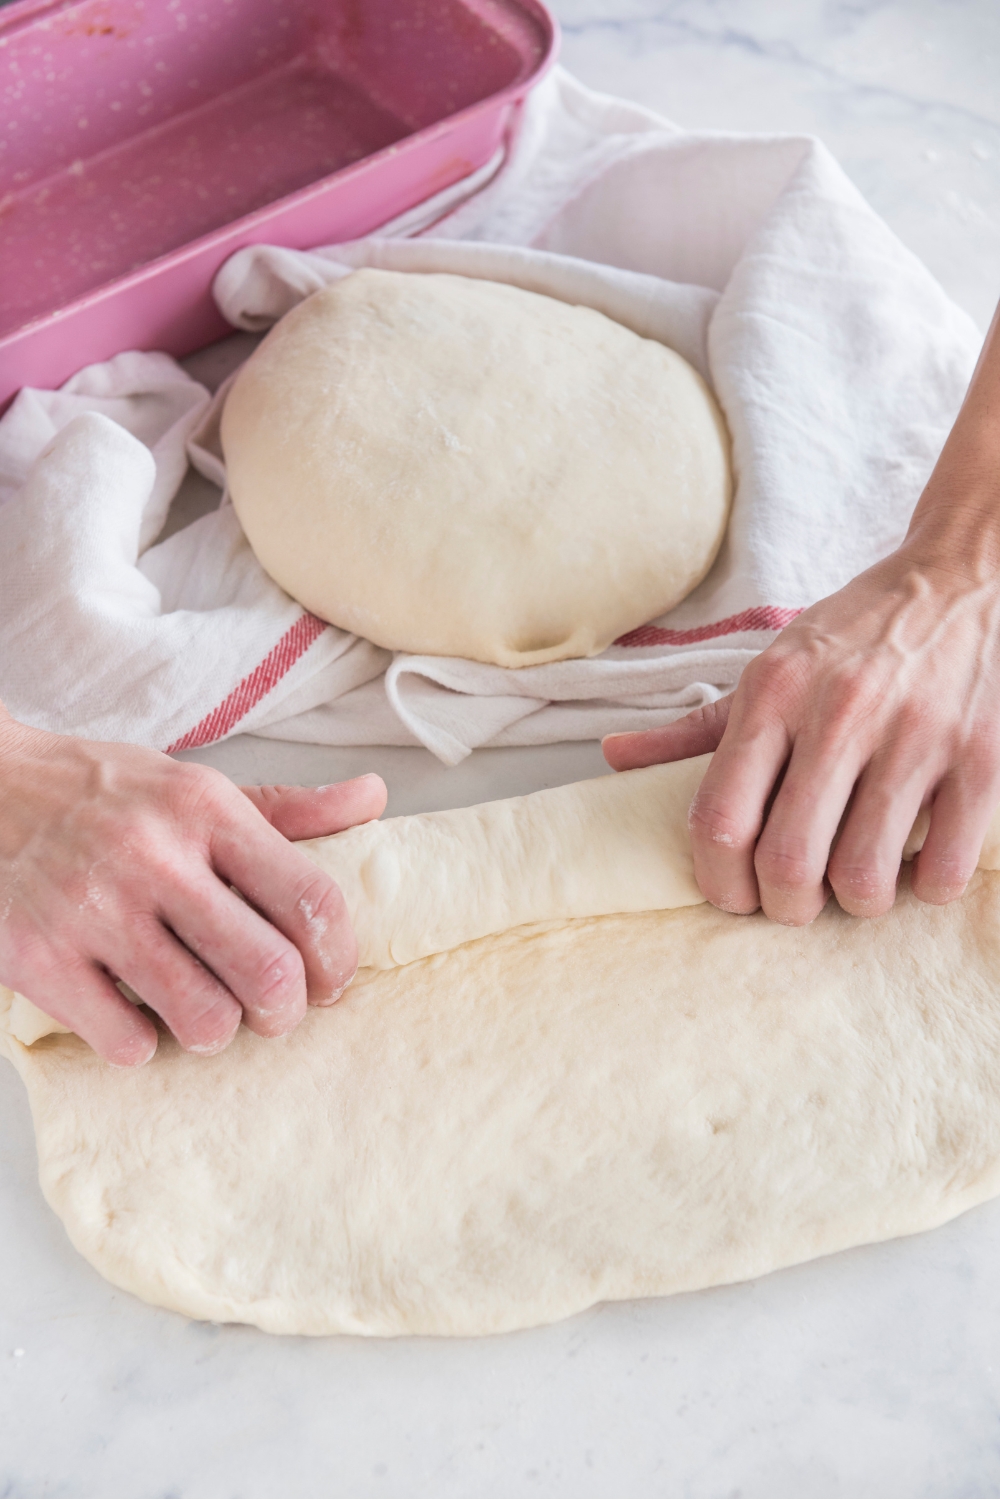 Flattened dough being wrapped into a tube/loaf shape.